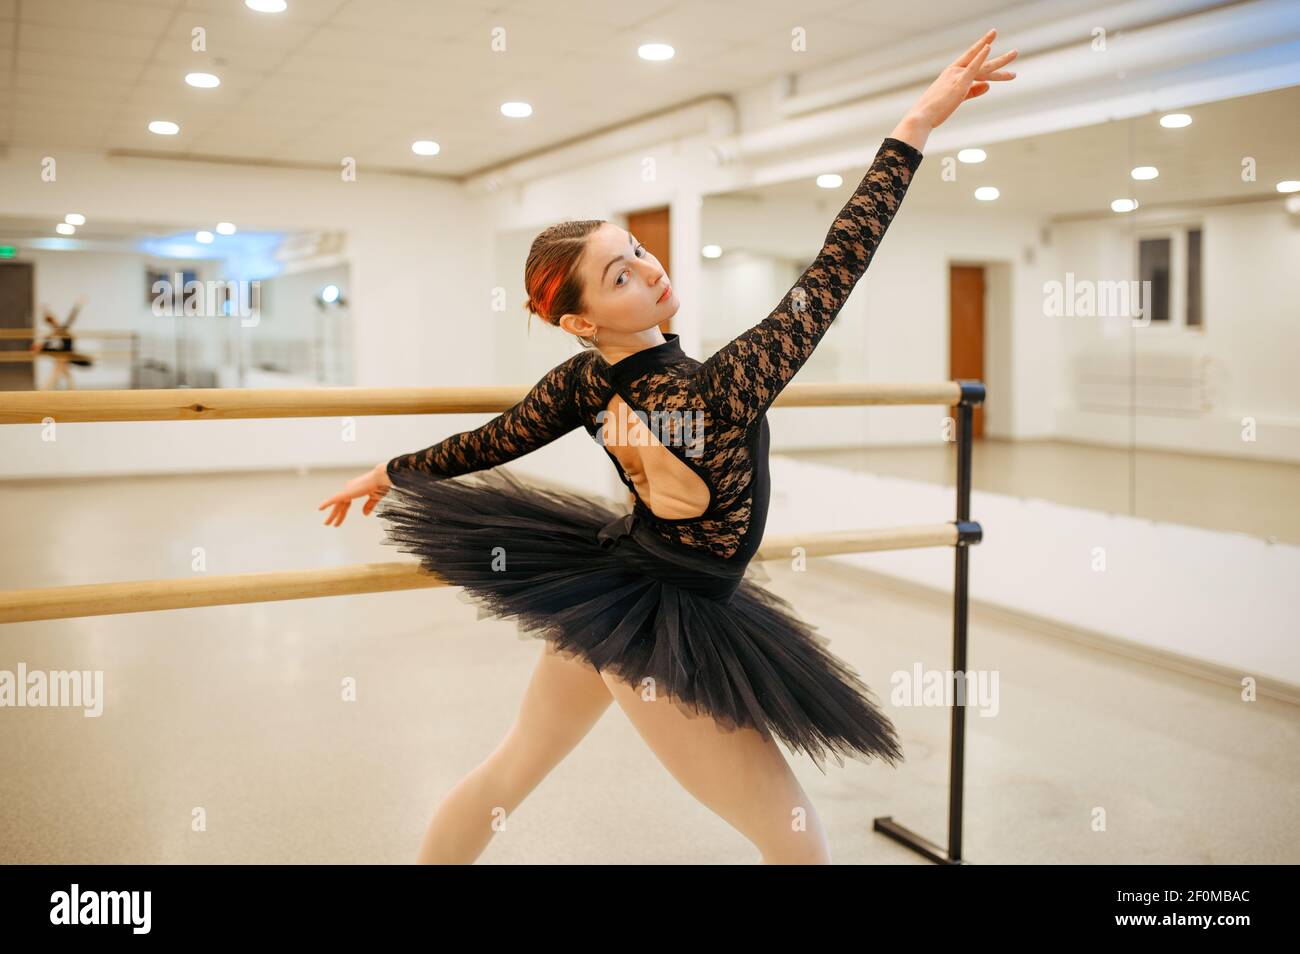 Choreographer poses at the barre, ballet school Stock Photo